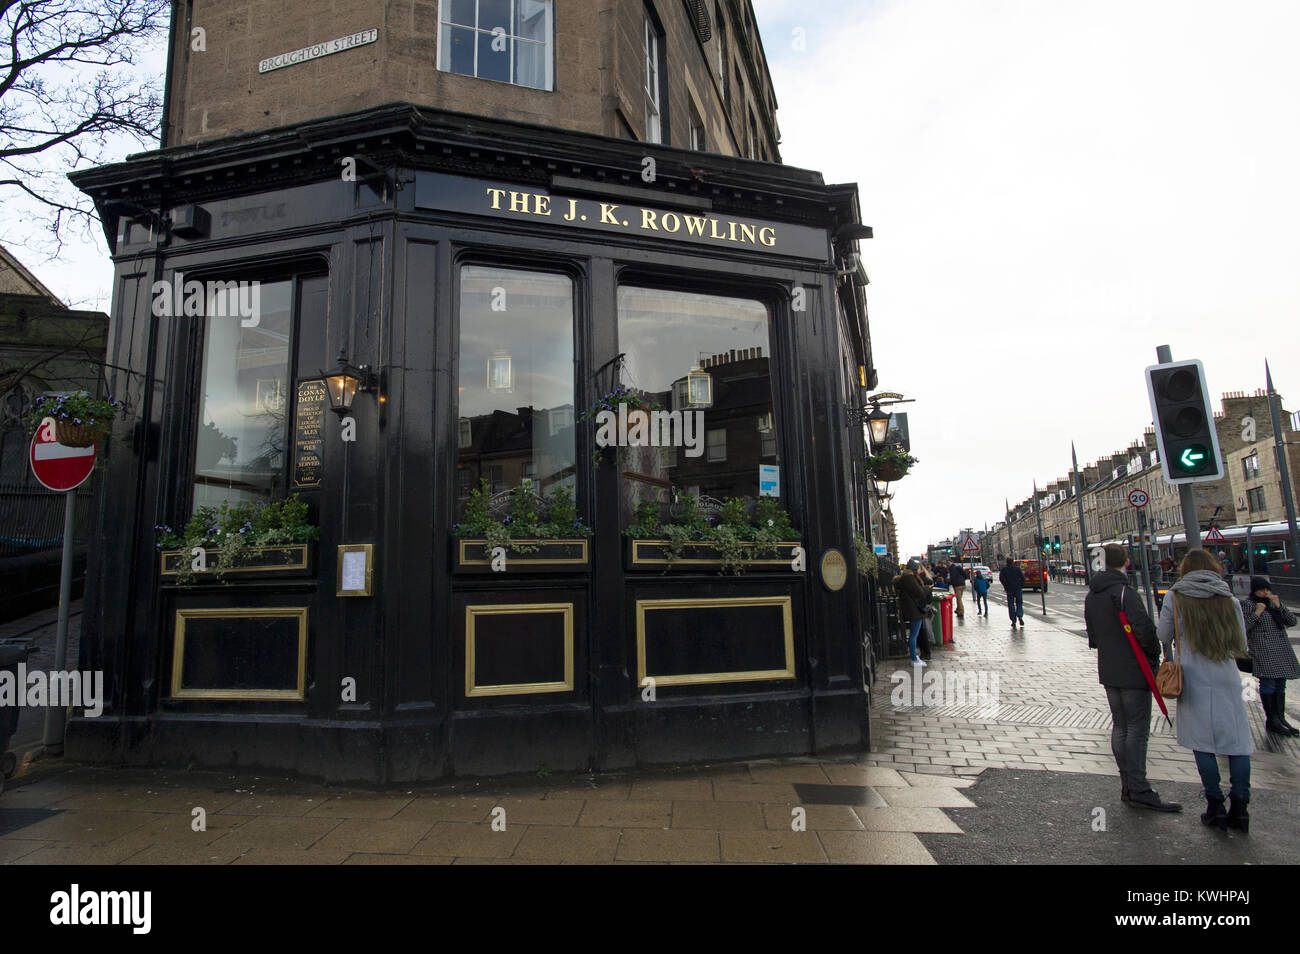 The Conan Doyle pub in Broughton Street, Edinburgh has been temporarily re-named the J. K Rowling after the Harry Potter author. Stock Photo